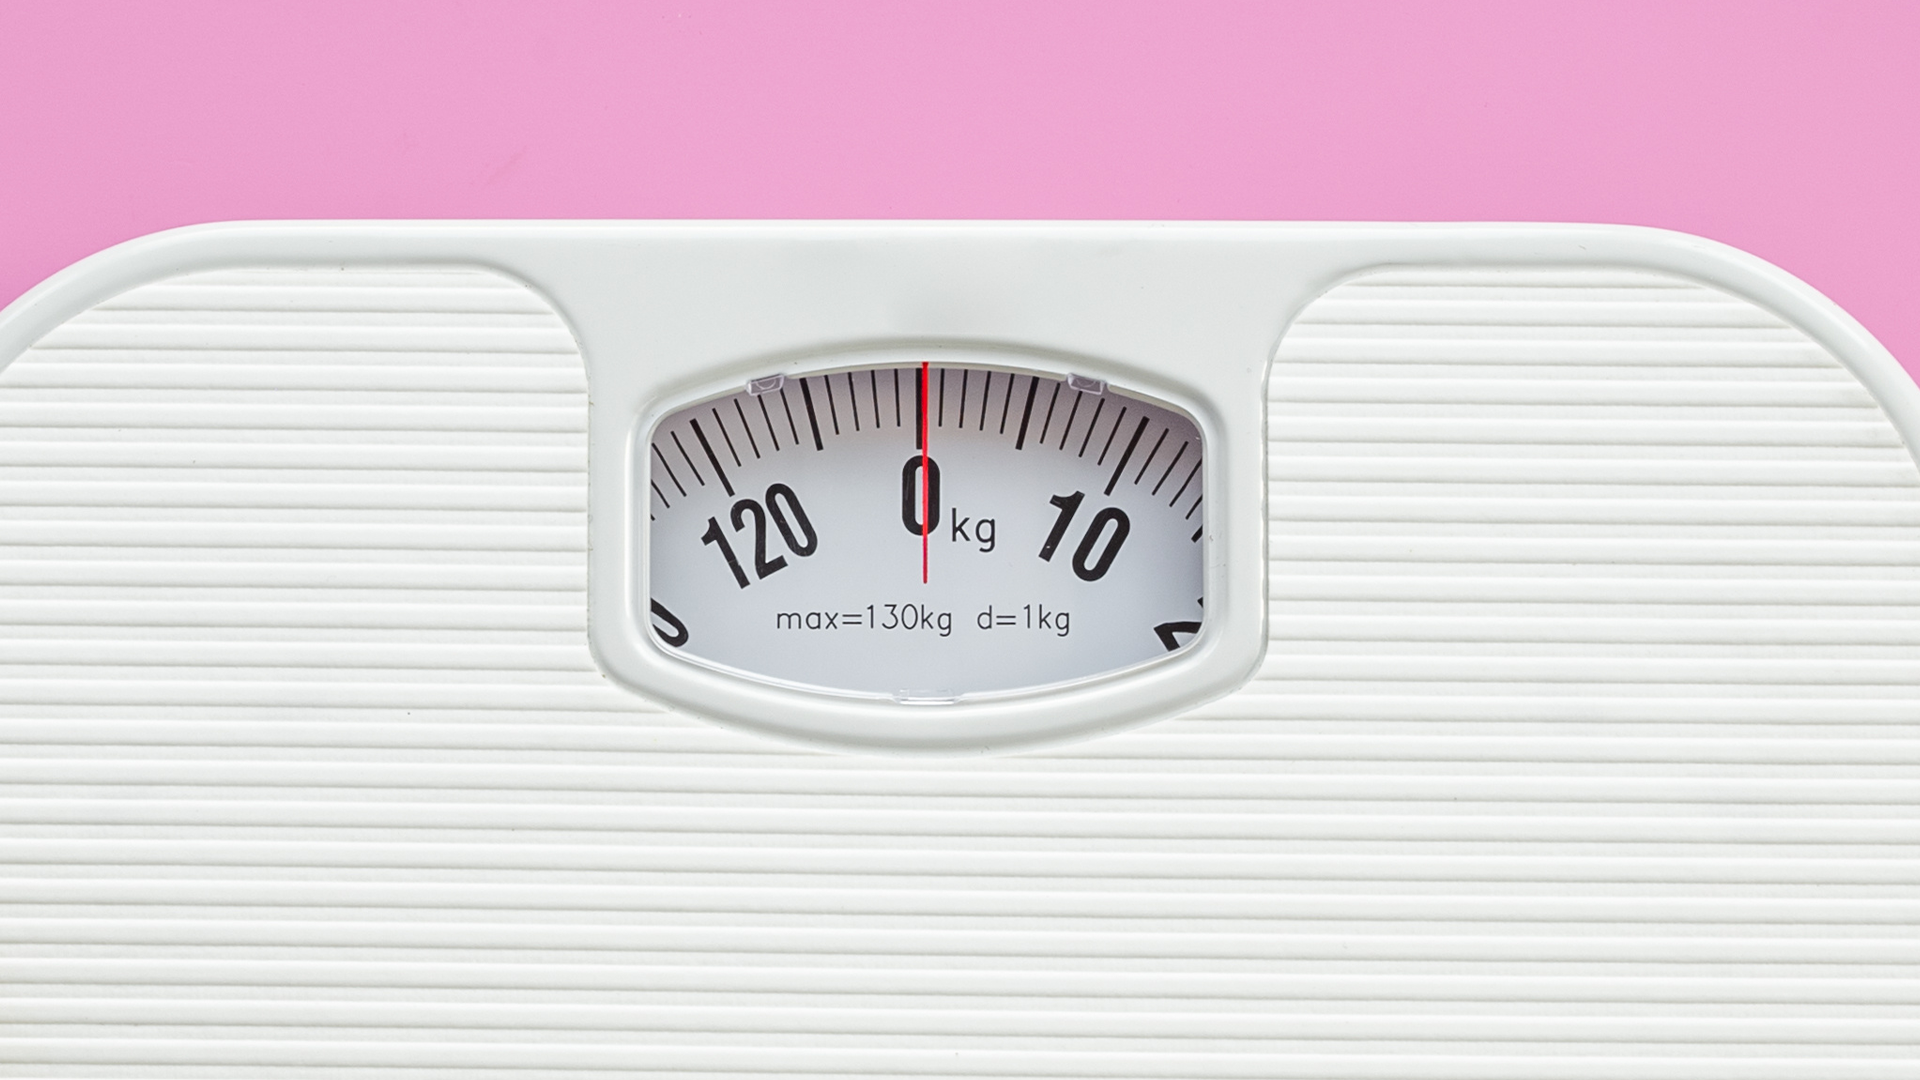 Does metabolism affect weight loss?